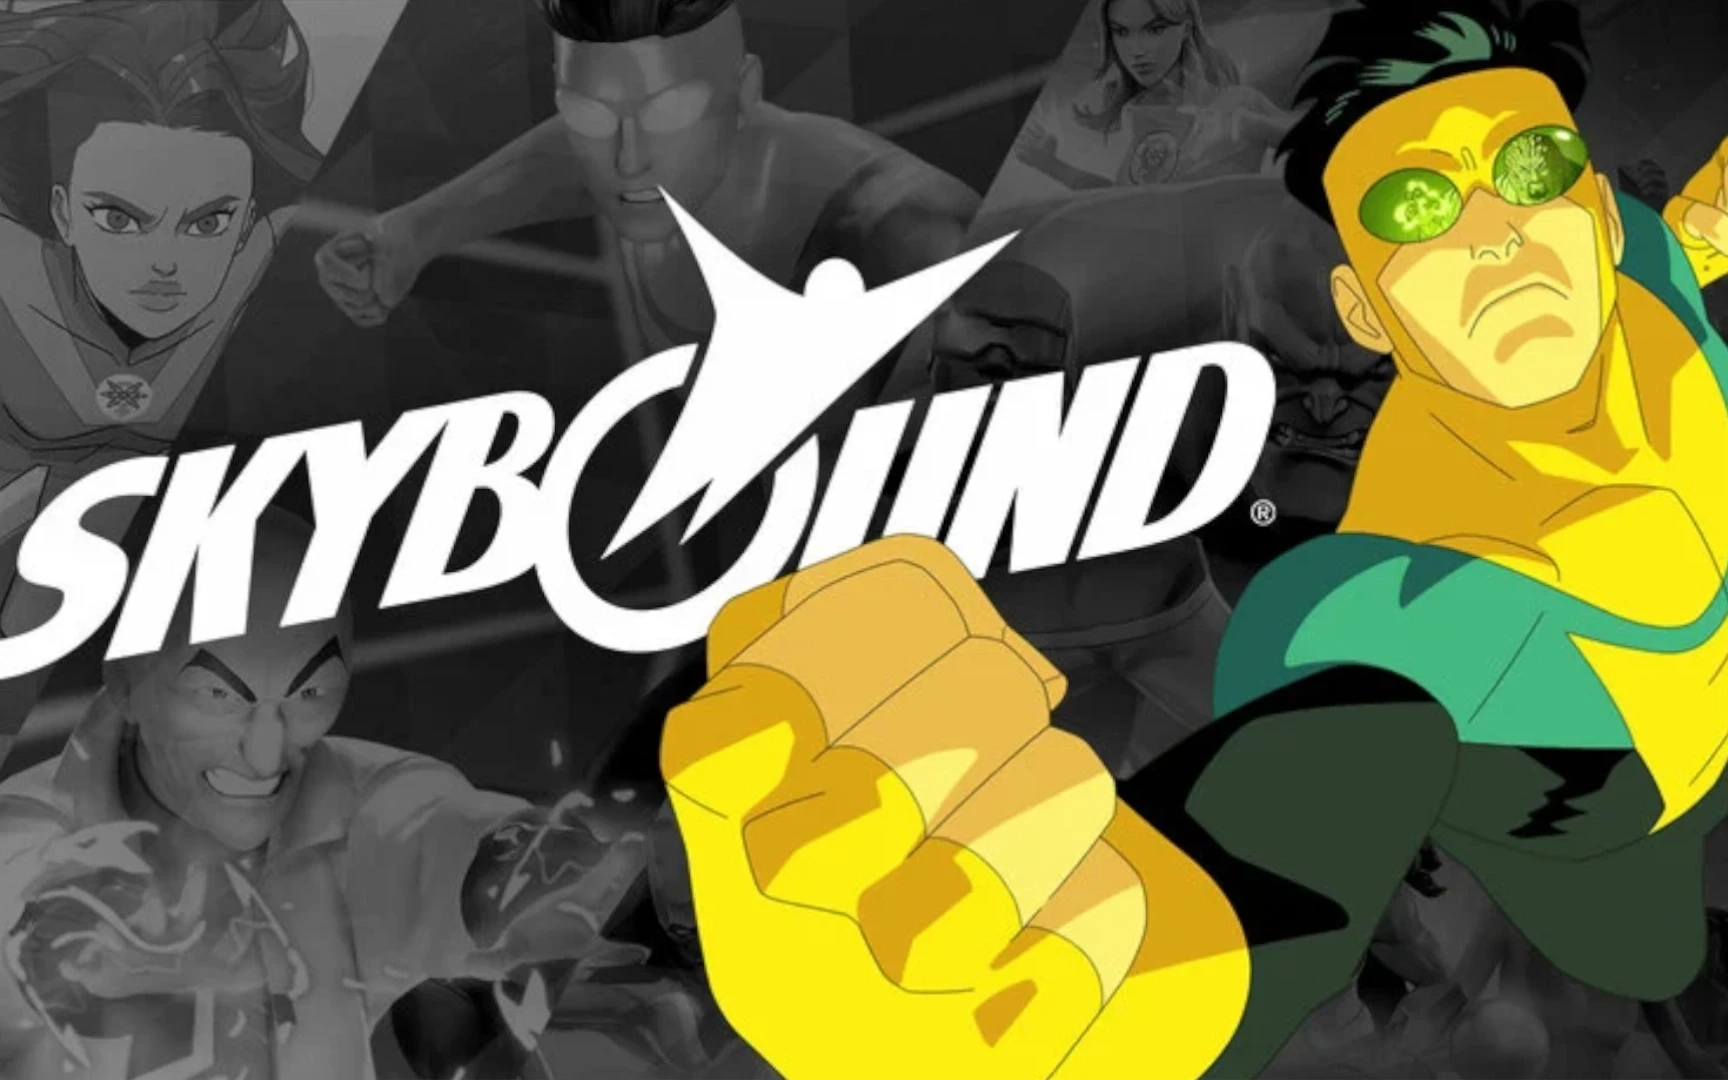 Invincible Skybound AAA game crowdfunding Republic